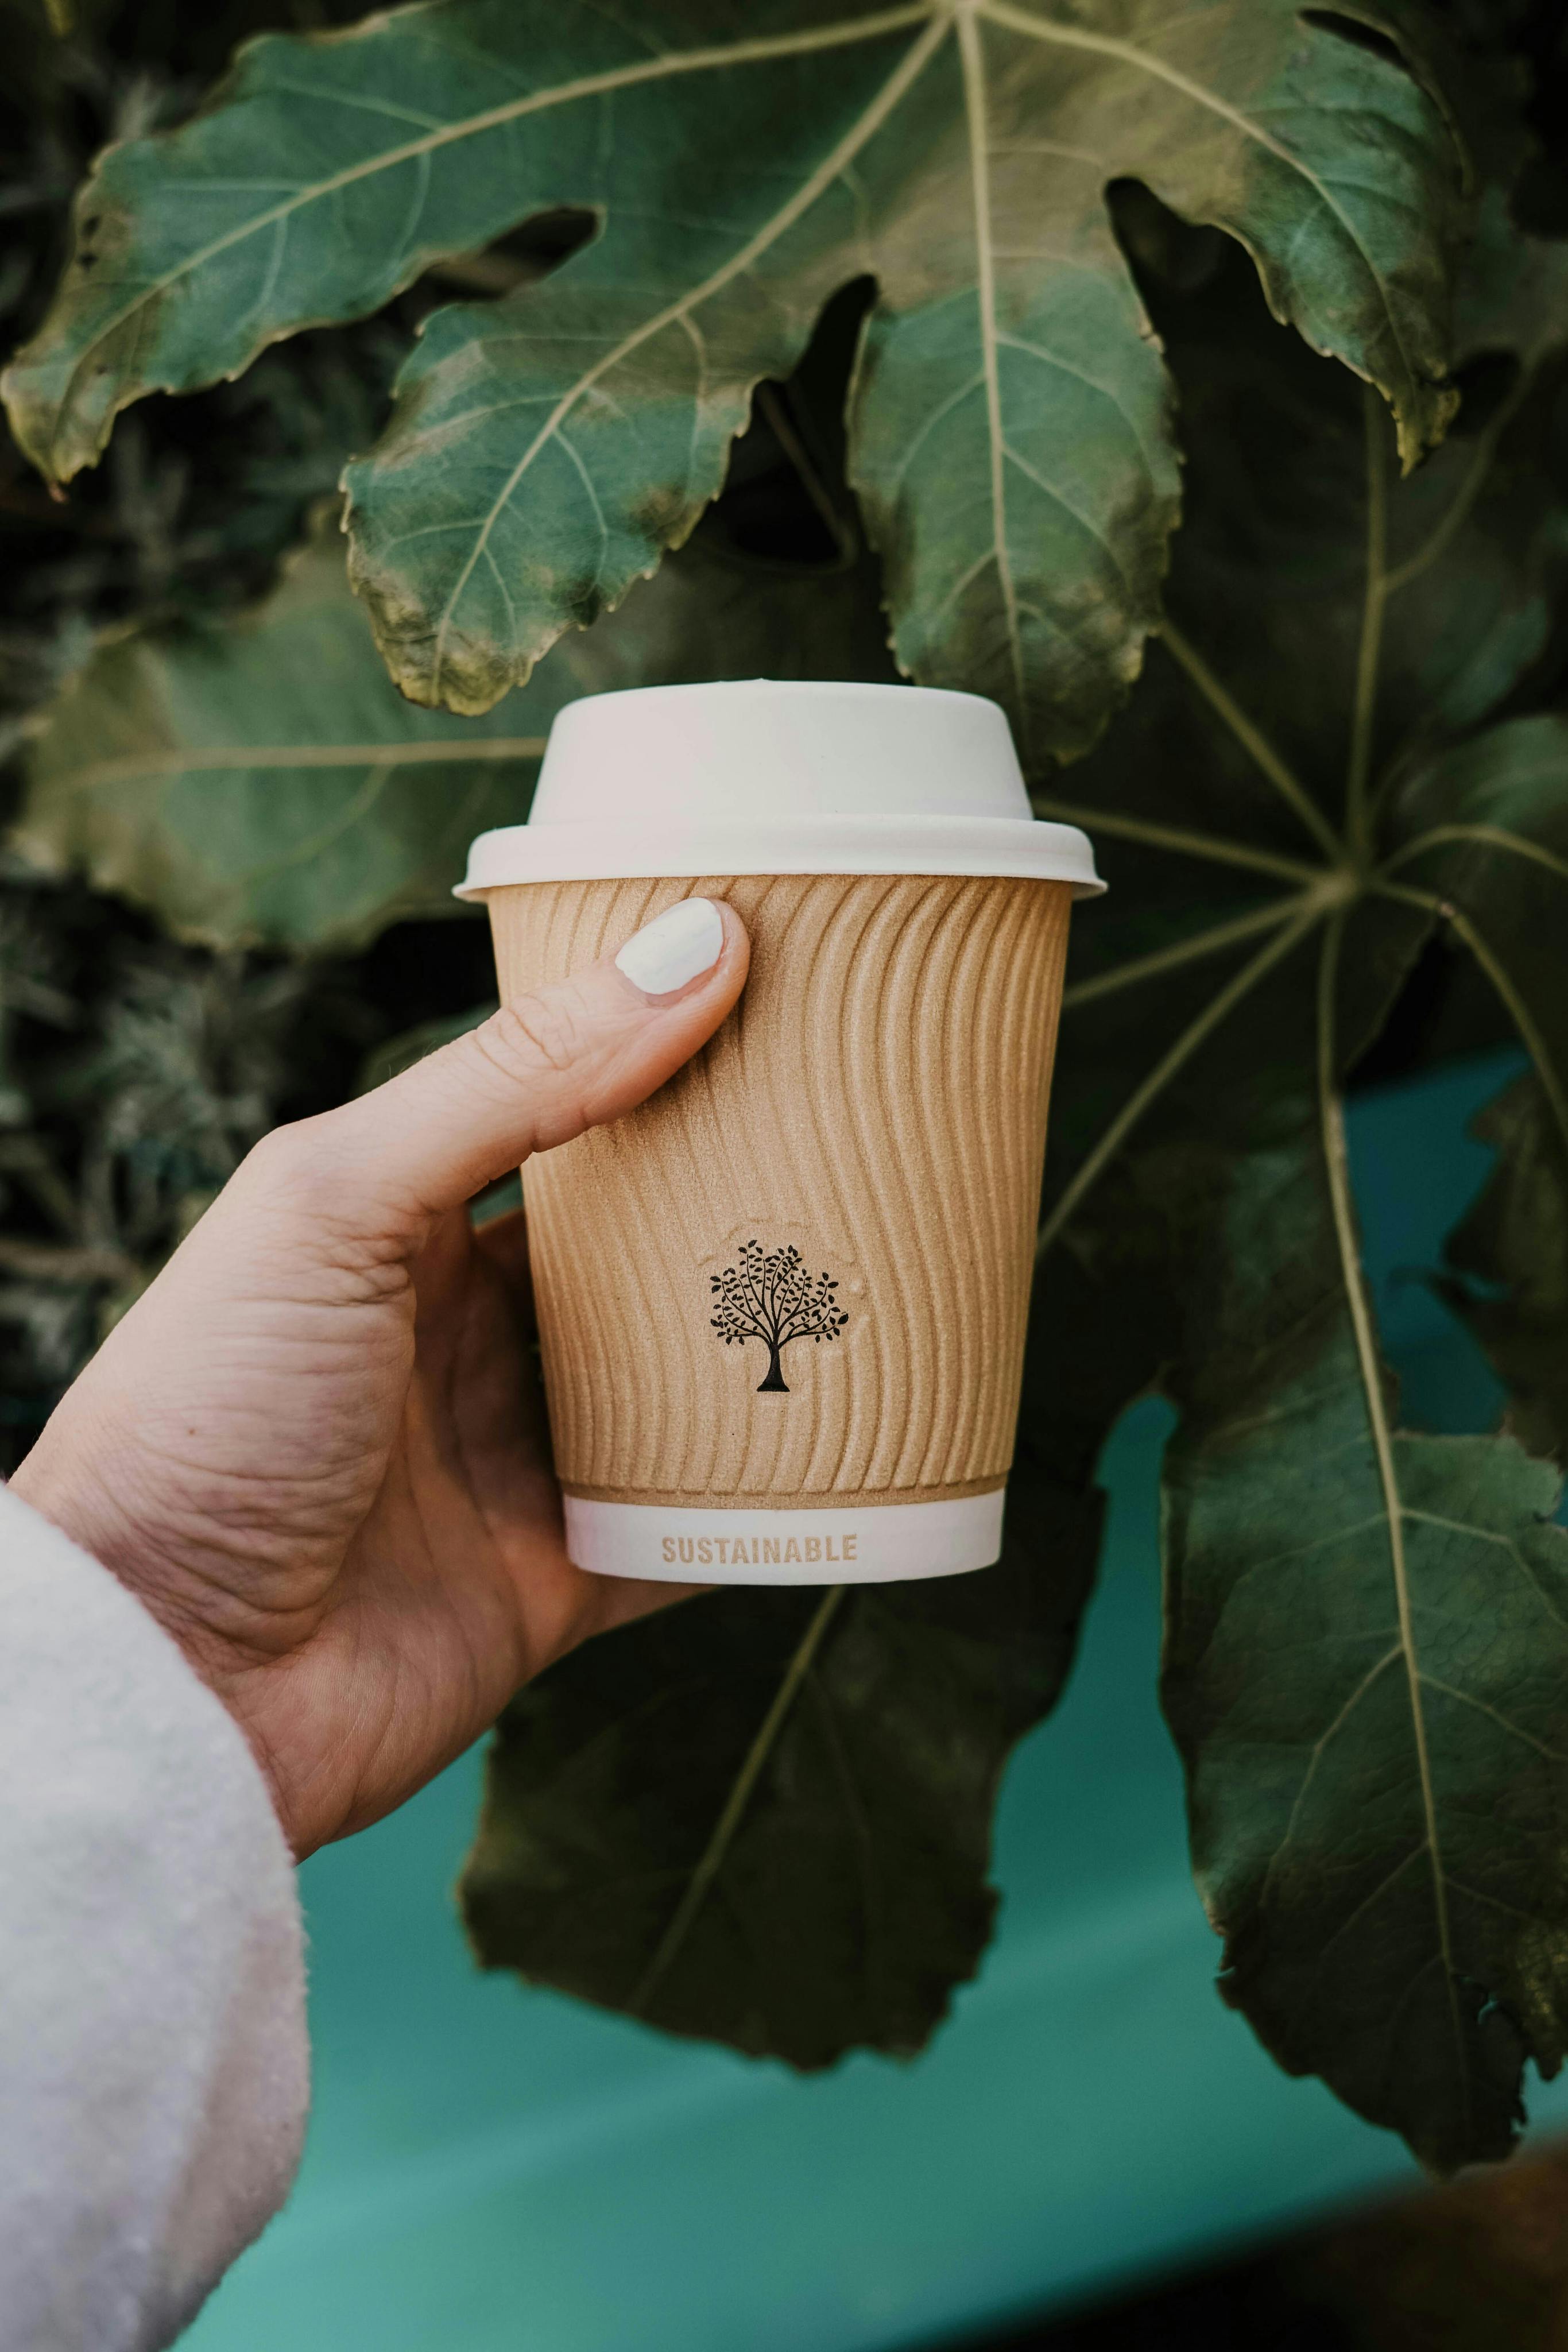 Photograph of a sustainable coffee cup being held in front of foliage